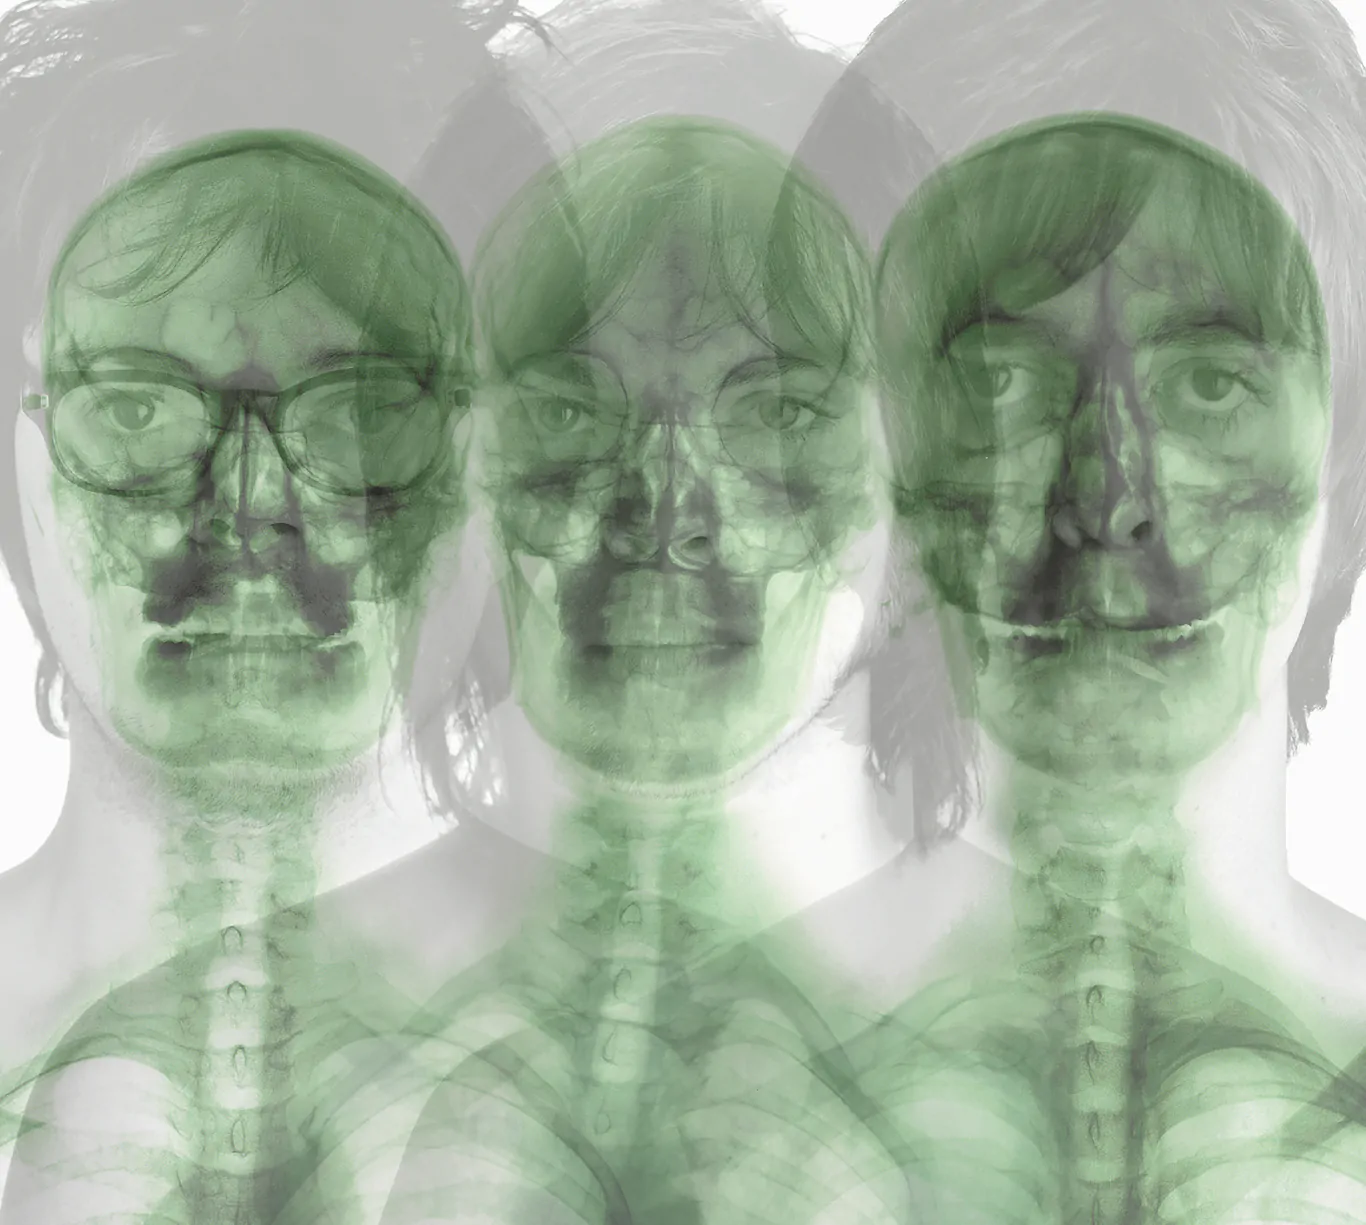 SUPERGRASS announce remastered deluxe expanded edition of eponymous 1999 album